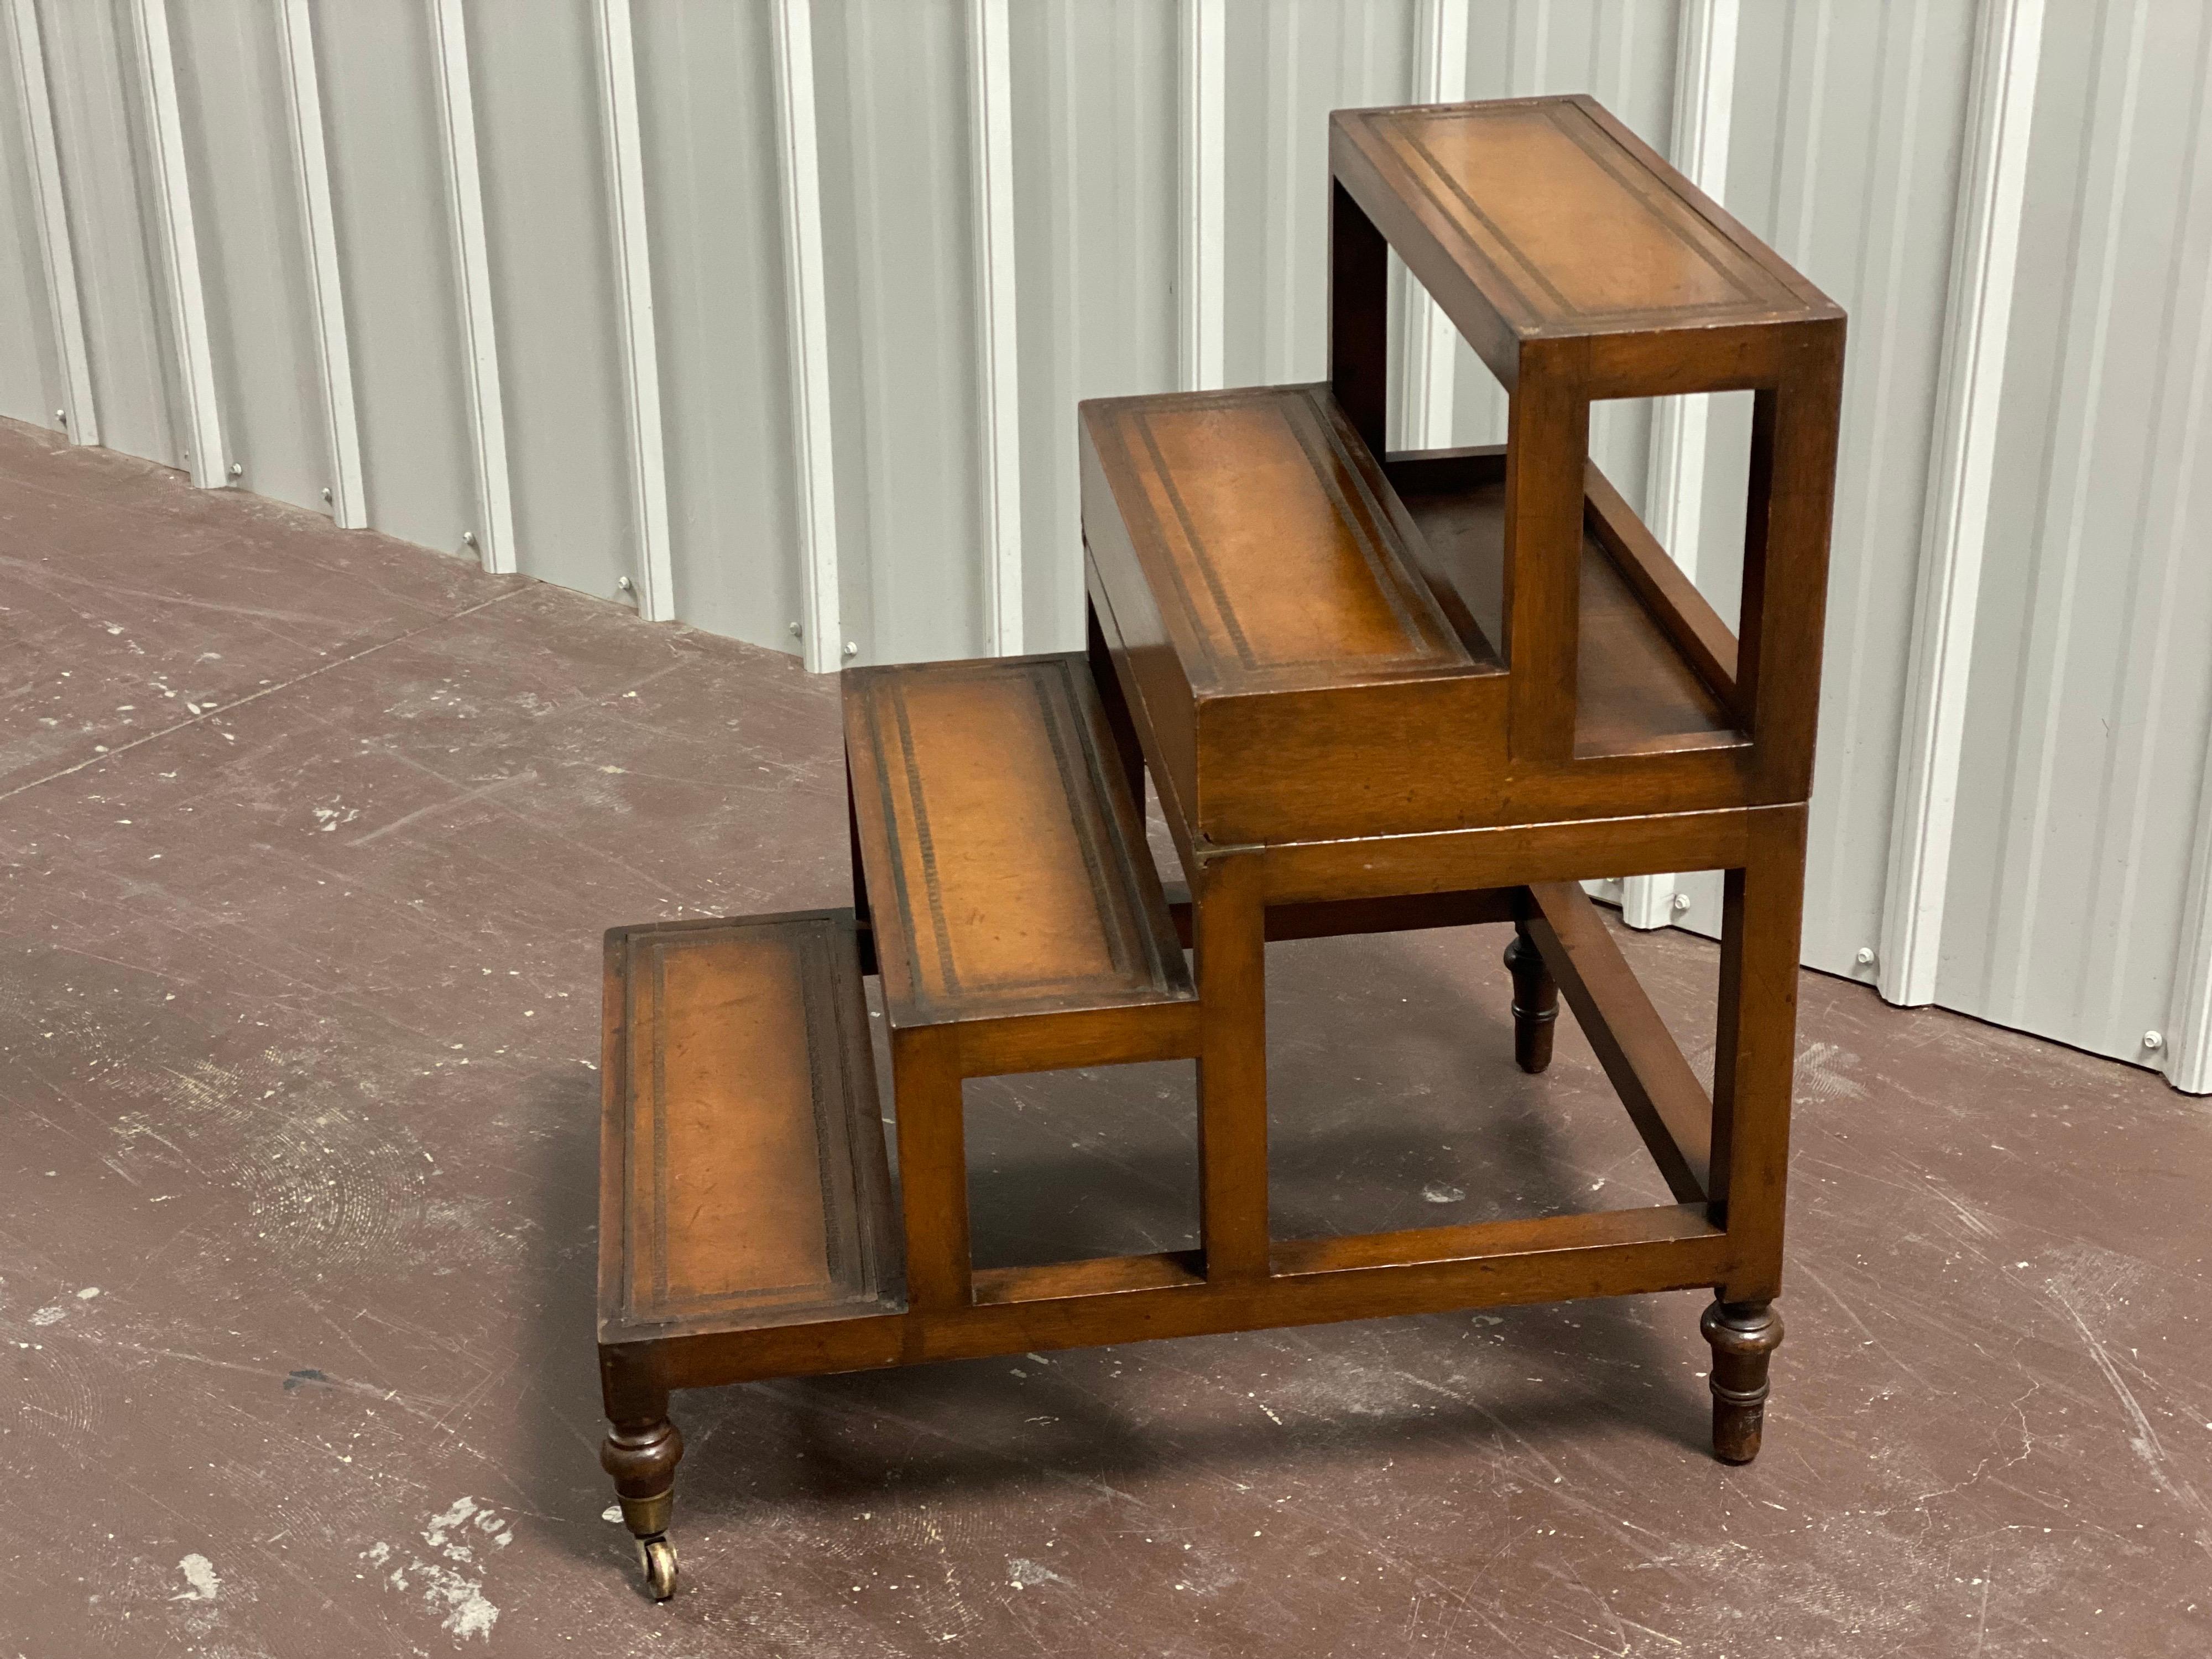 Early 20th century folding library steps/table. Mahogany Library steps with inset tooled leather surfaces. Stains to leather, repaired splits to one leg, wear from use. Featuring four steps when opened. Closes to a leather top coffee table. Two legs